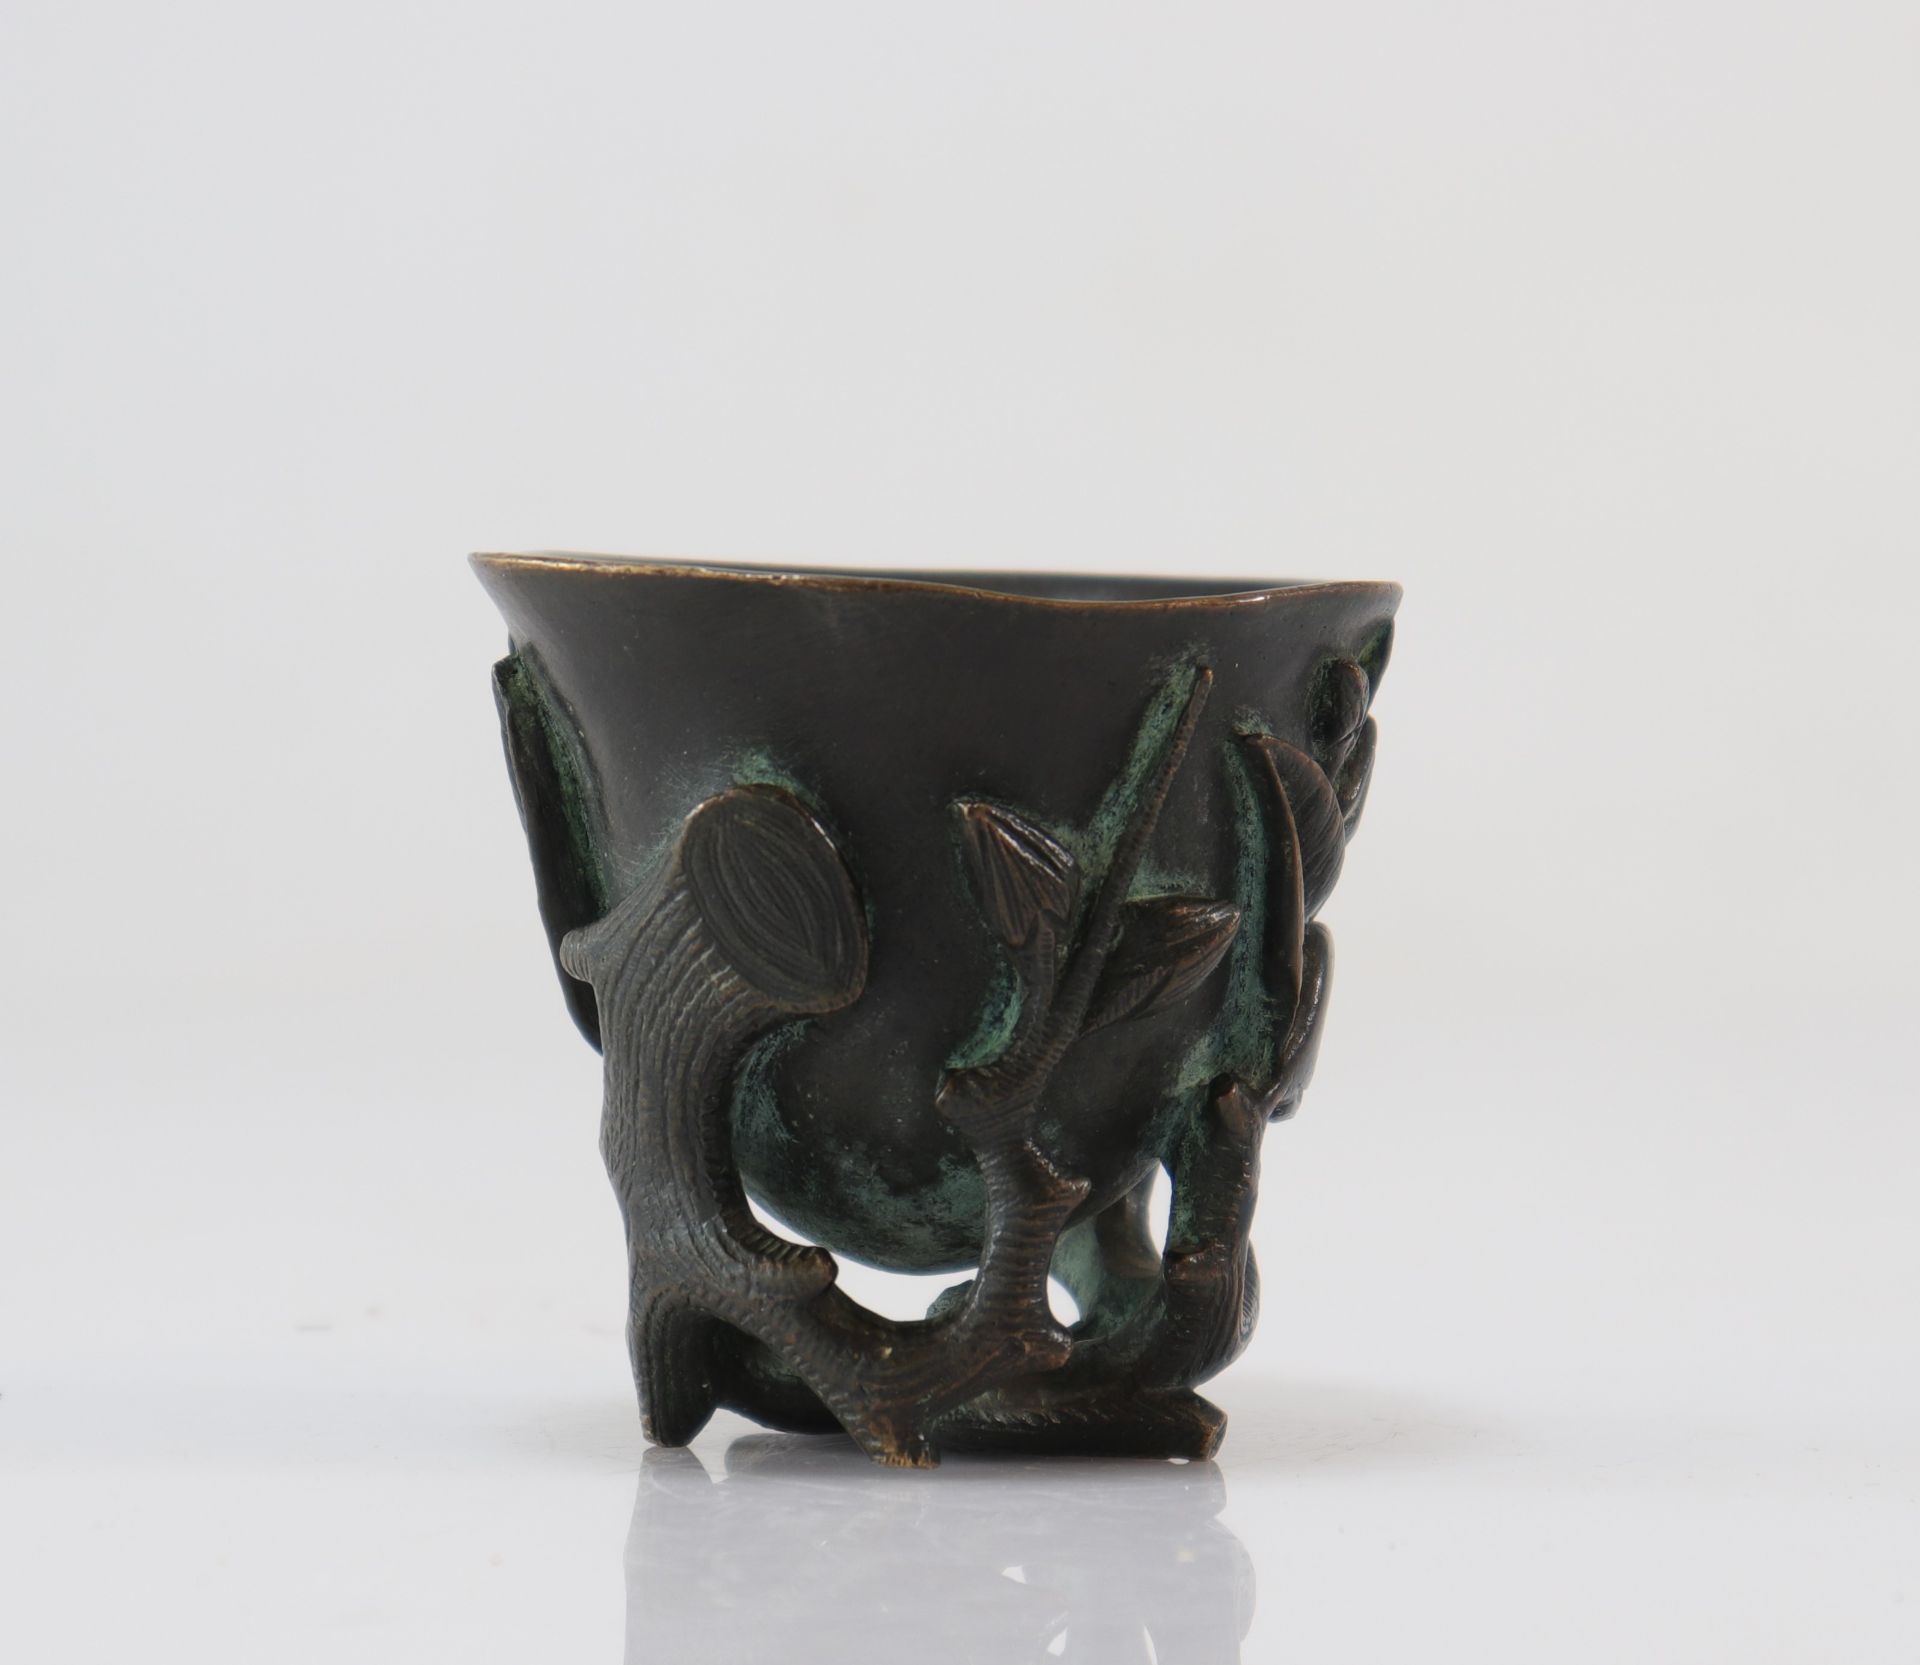 Chinese libation cup in 18th century bronze or earlier - Image 3 of 6